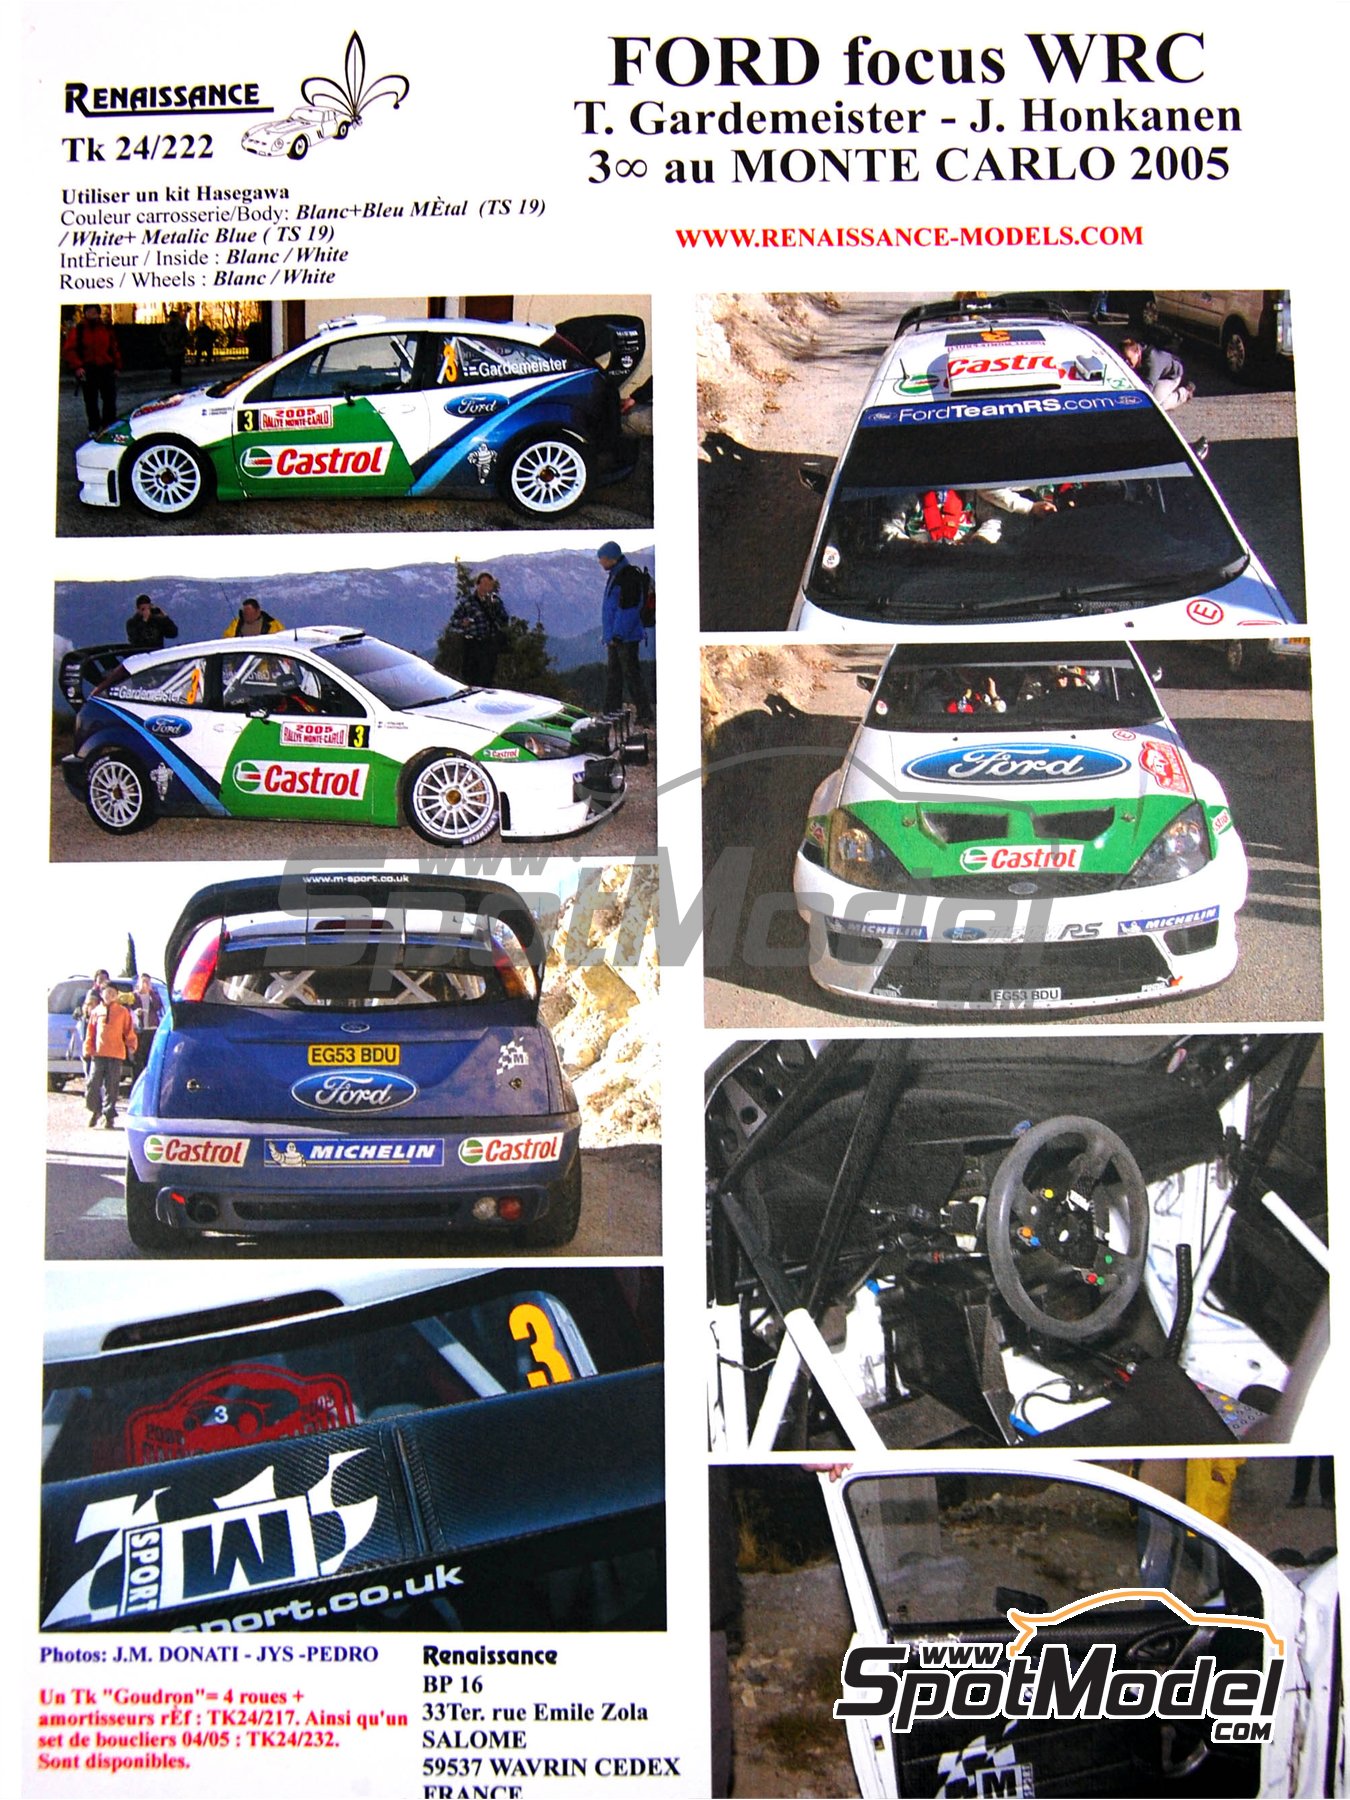 DECALS 1/18 REF 0521 FOCUS WRC DUVAL RALLYE MONTE CARLO 2003 RALLY 